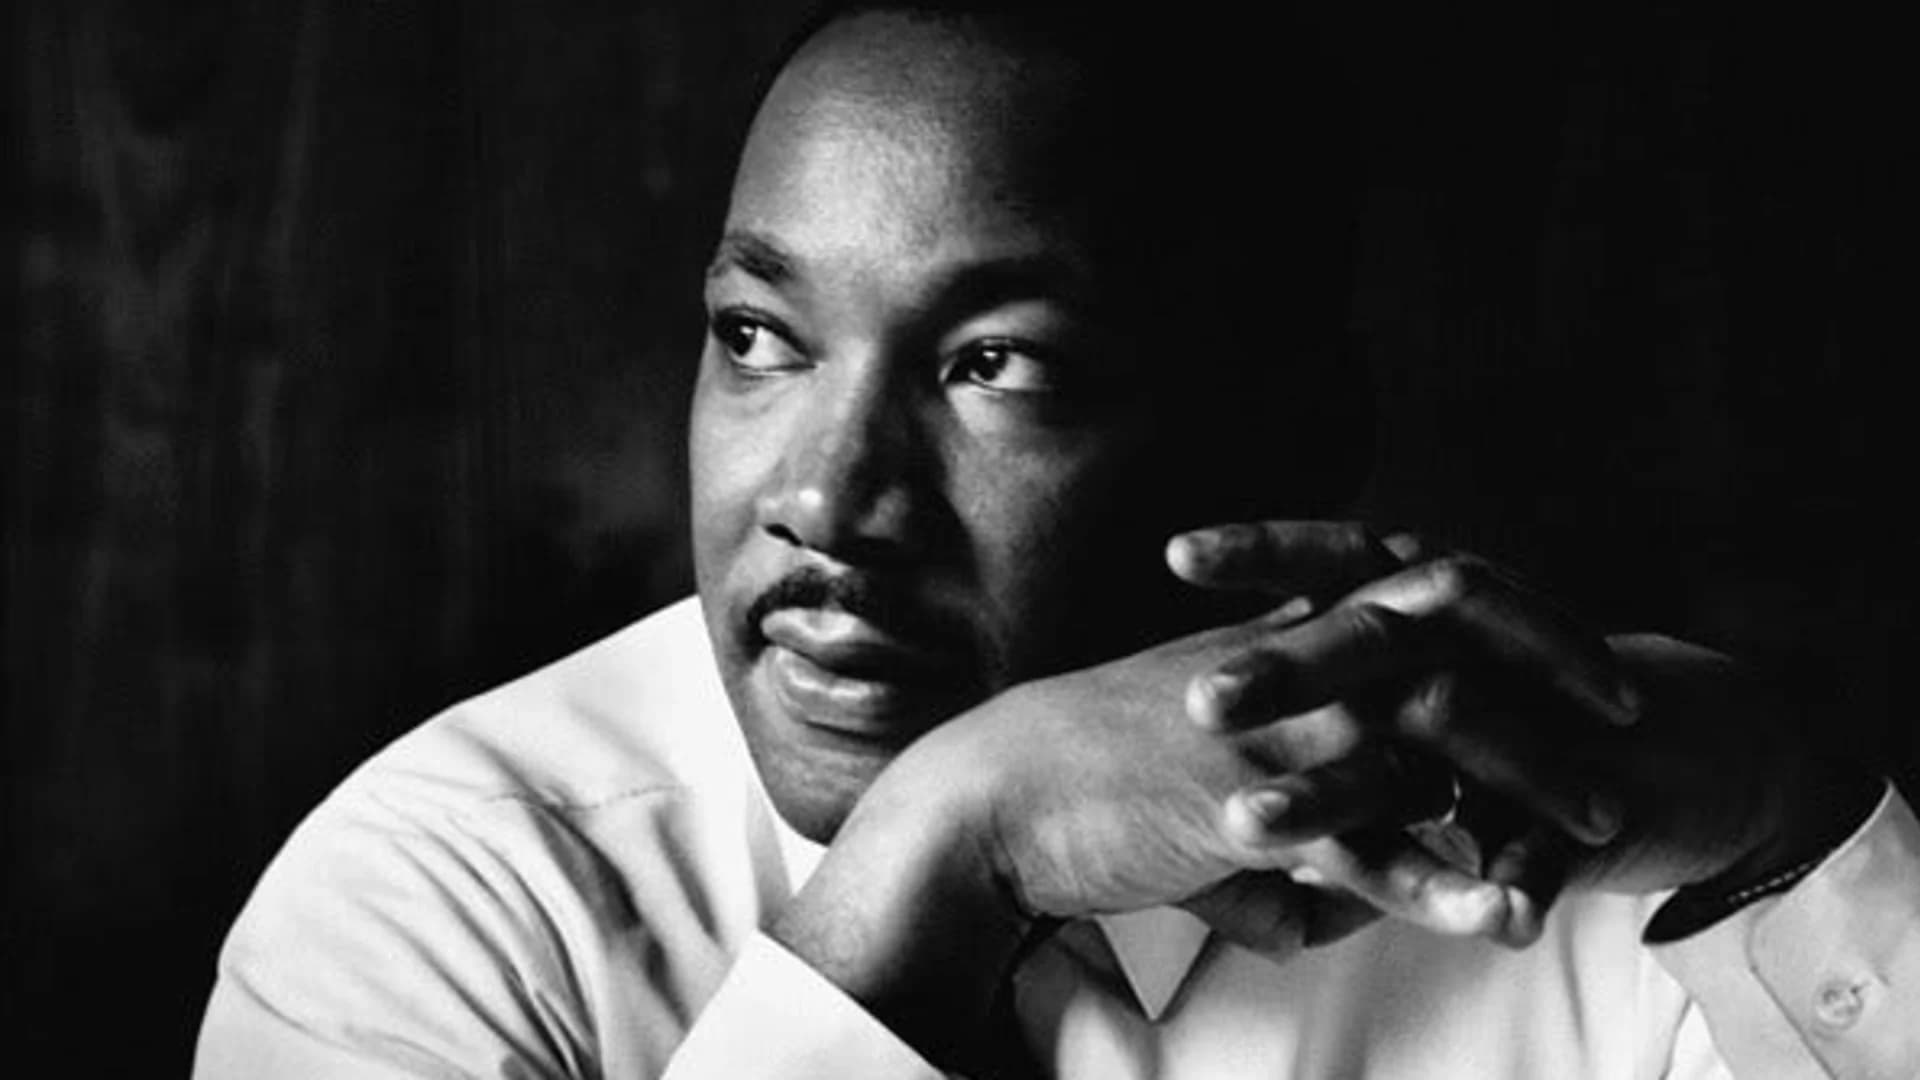 #N12BK: Martin Luther King Jr. assassinated 50 years ago today